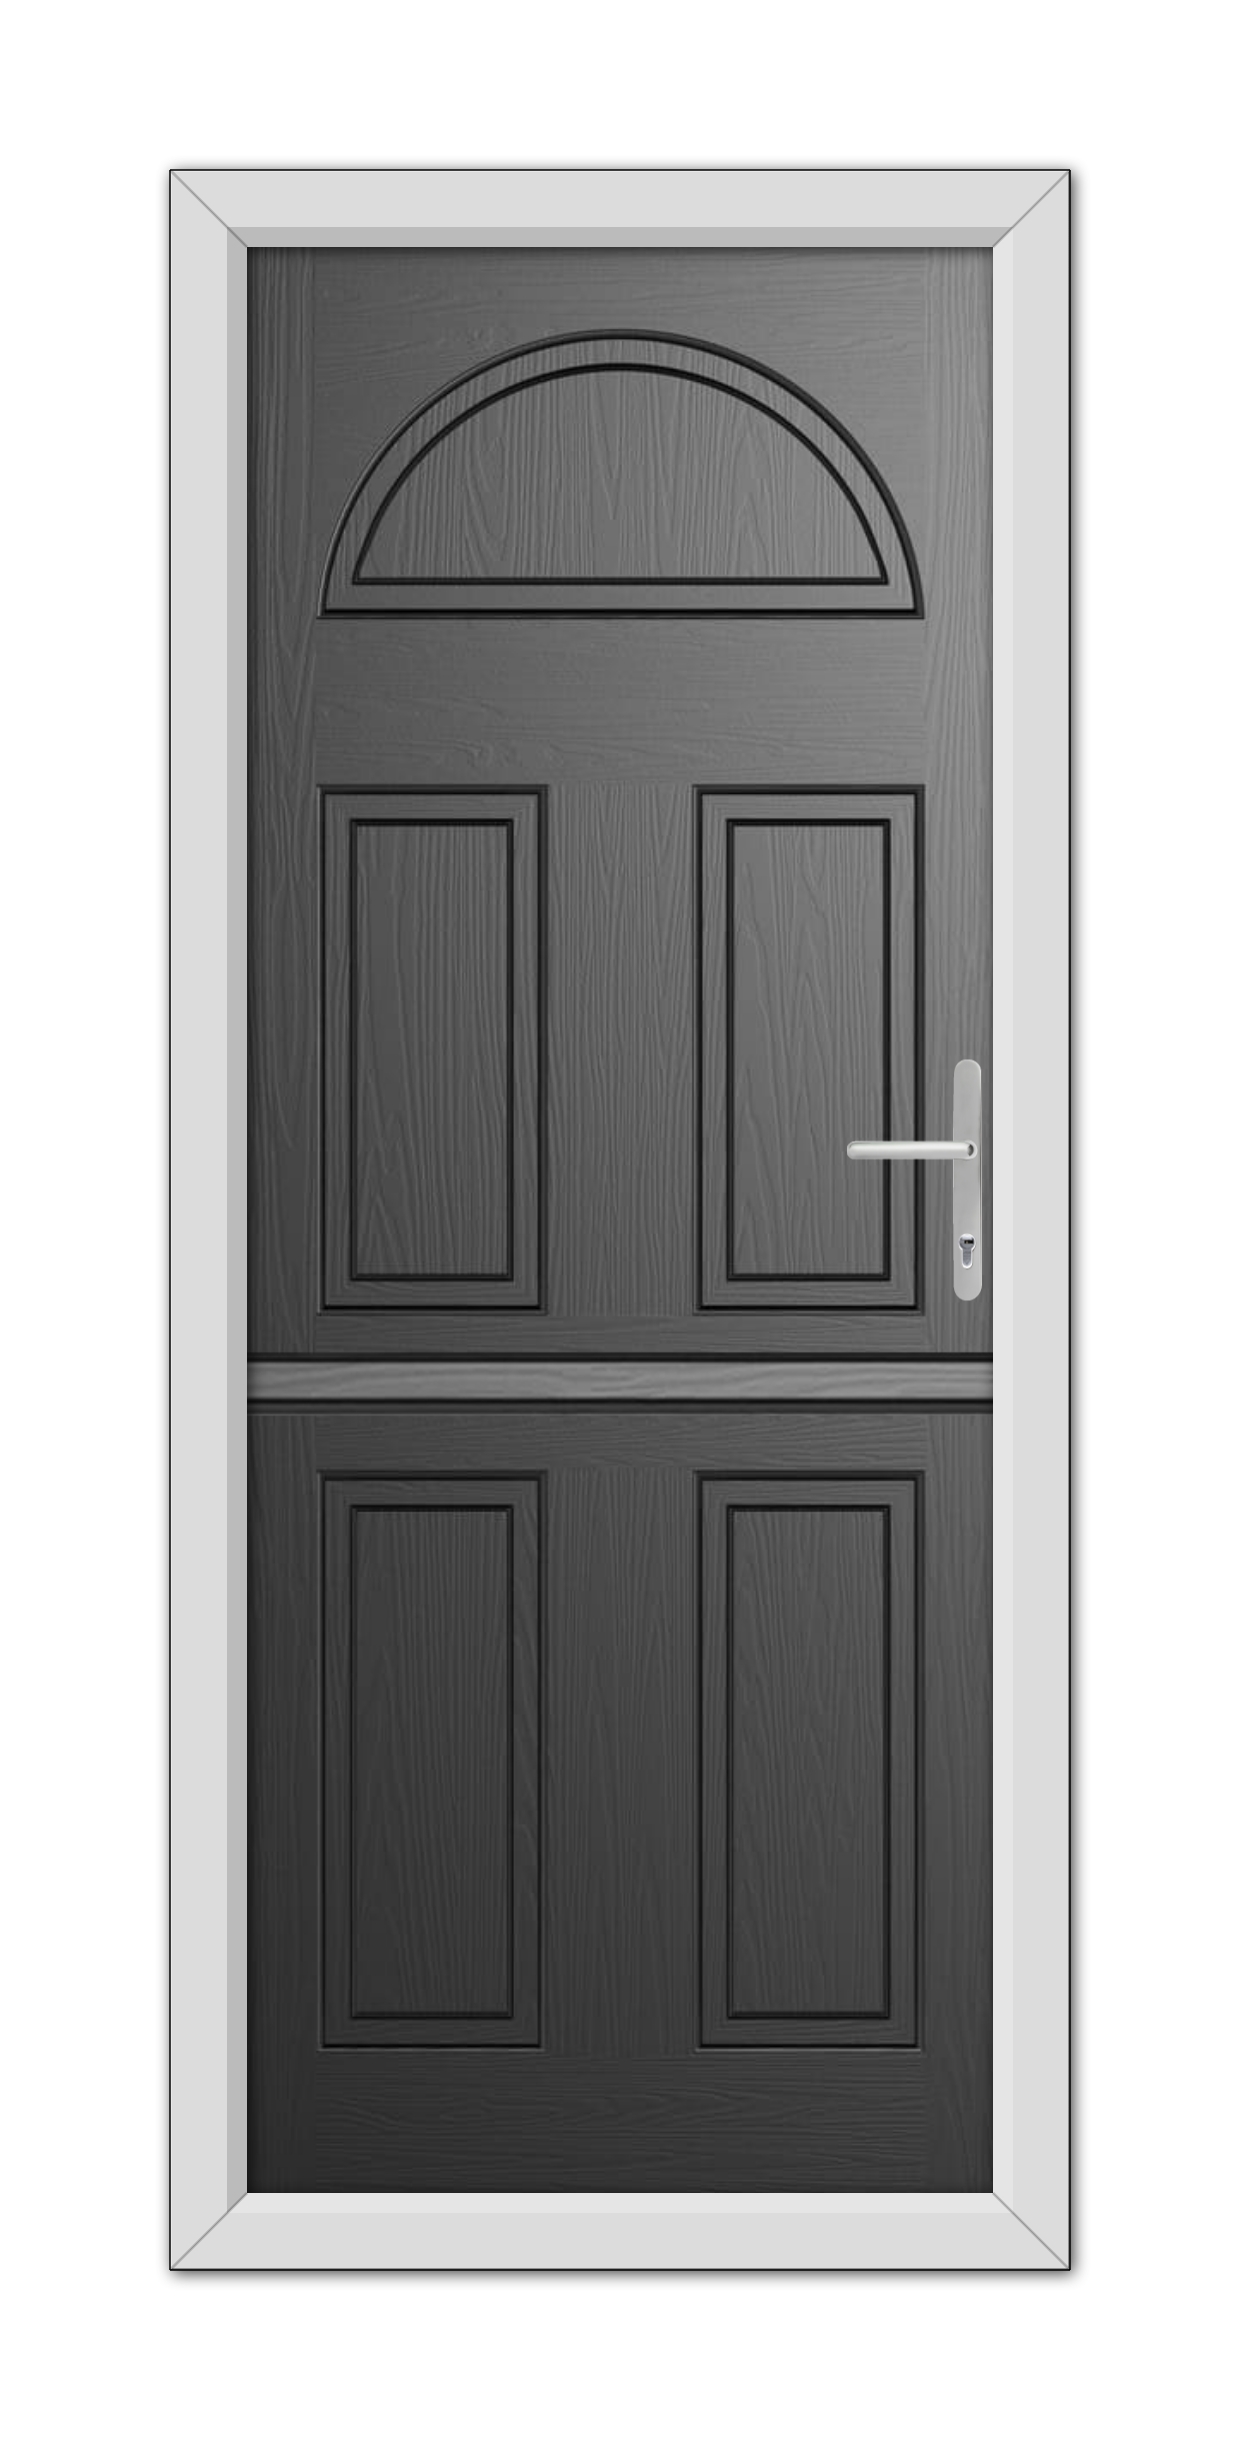 A Black Winslow Solid Stable Composite Door 48mm Timber Core with six panels and a semi-circular transom window framed in white.